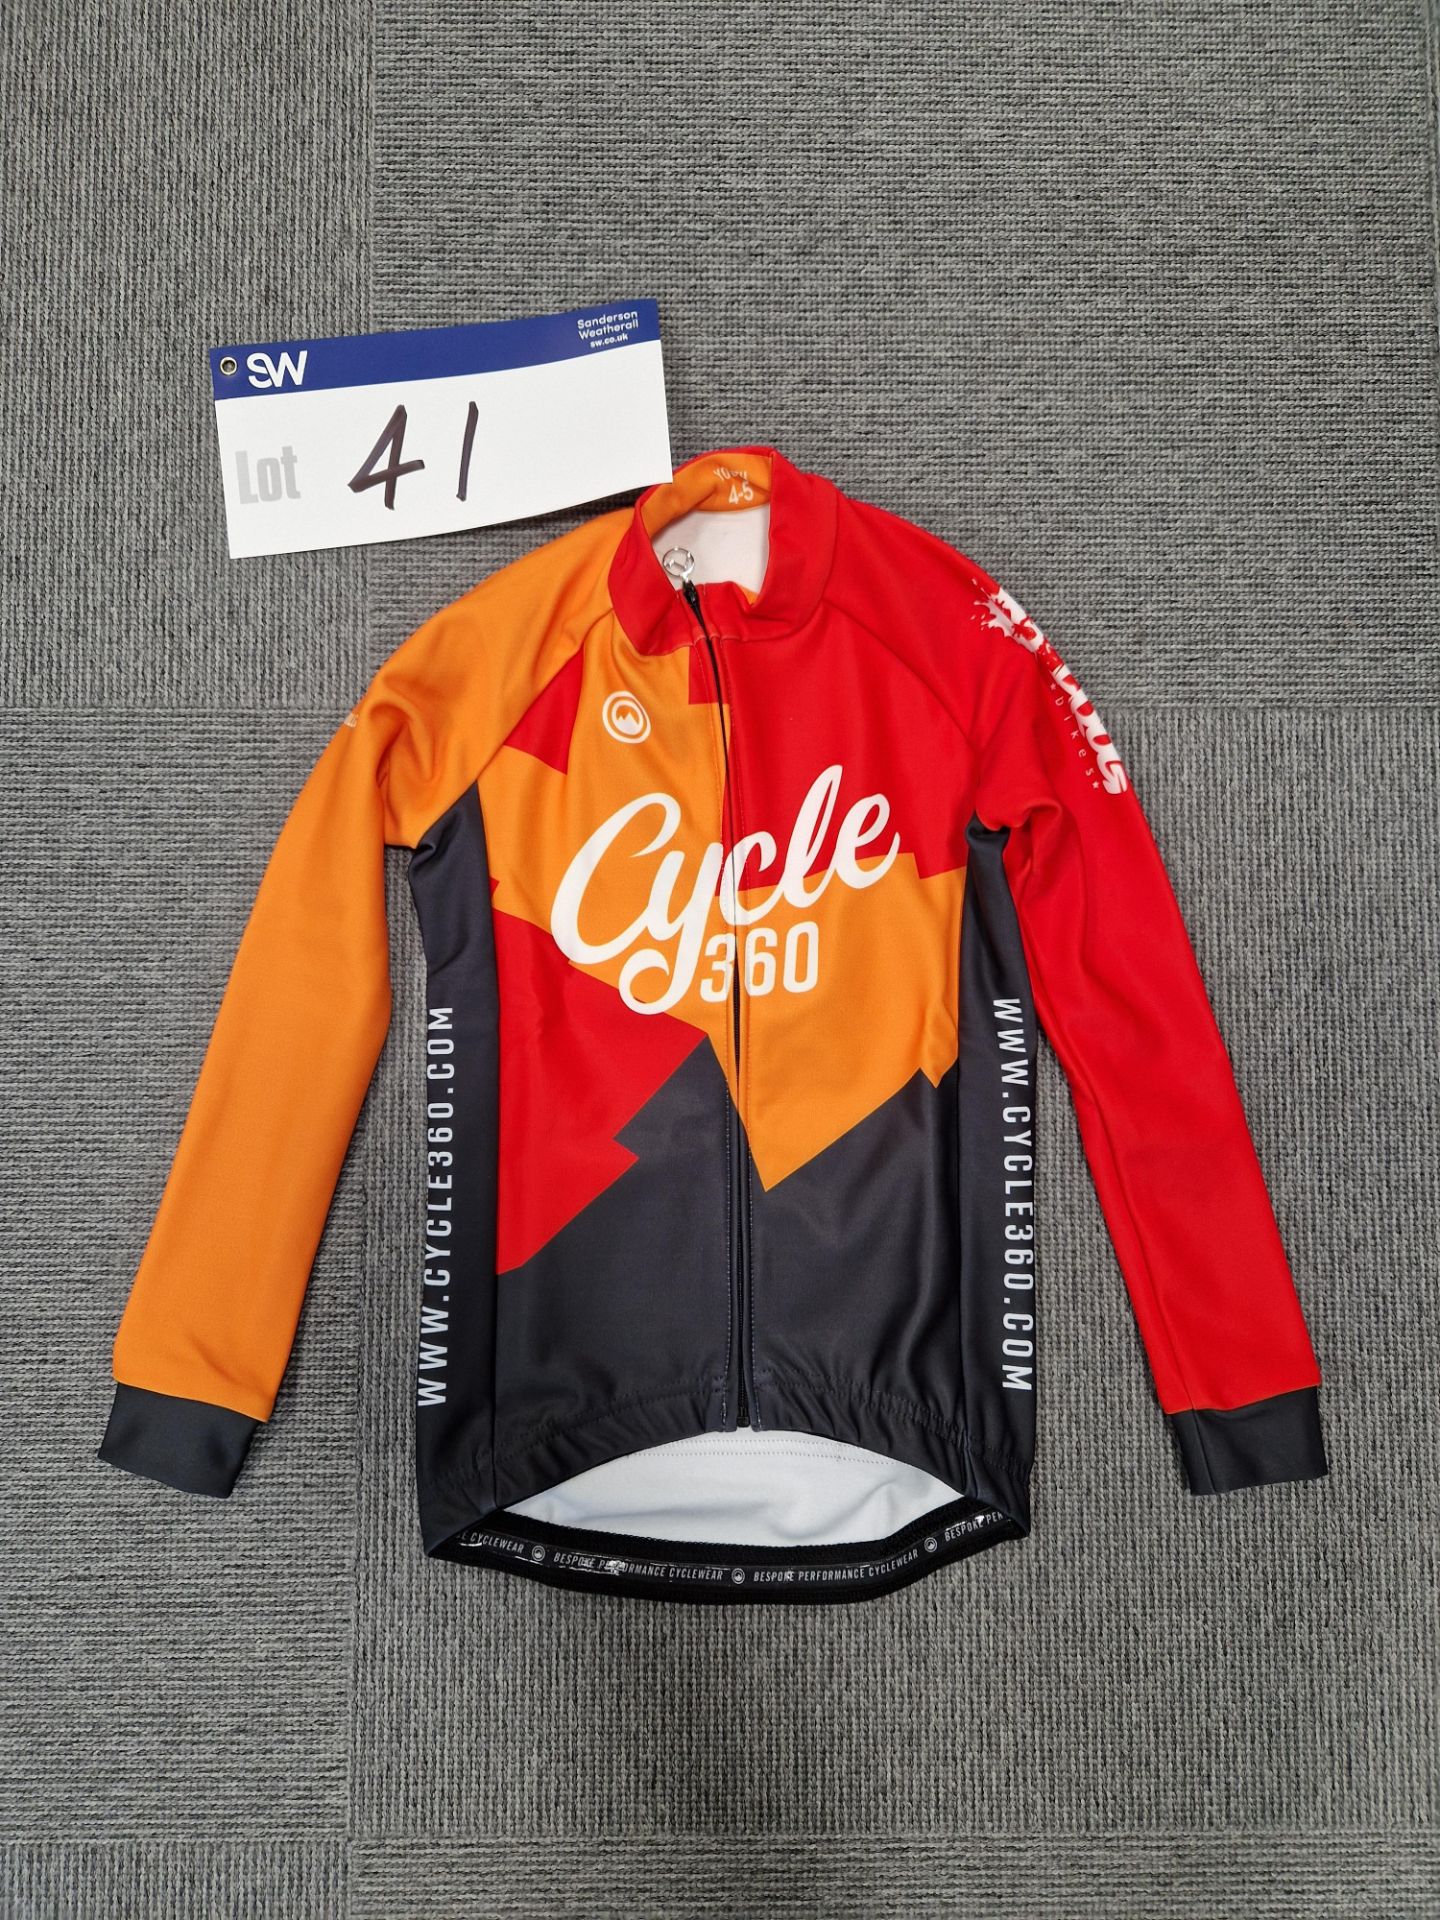 Youth's 4-5 Milltag Cycling Jacket, Branded Cycle 360, 100% PolyesterPlease read the following